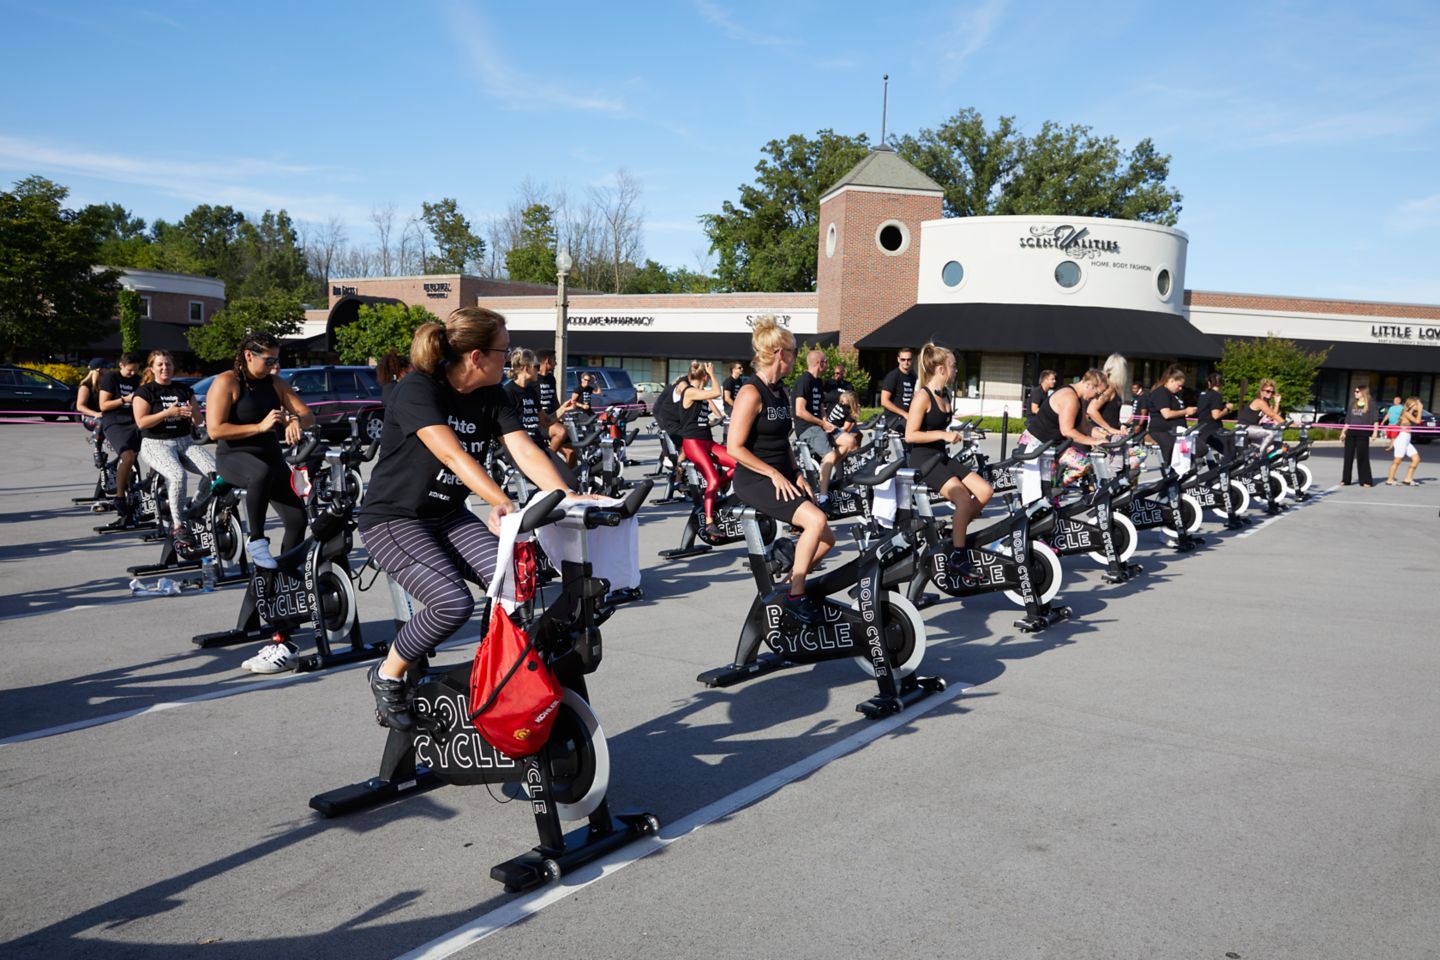 an outdoor cycling class on stationary bikes